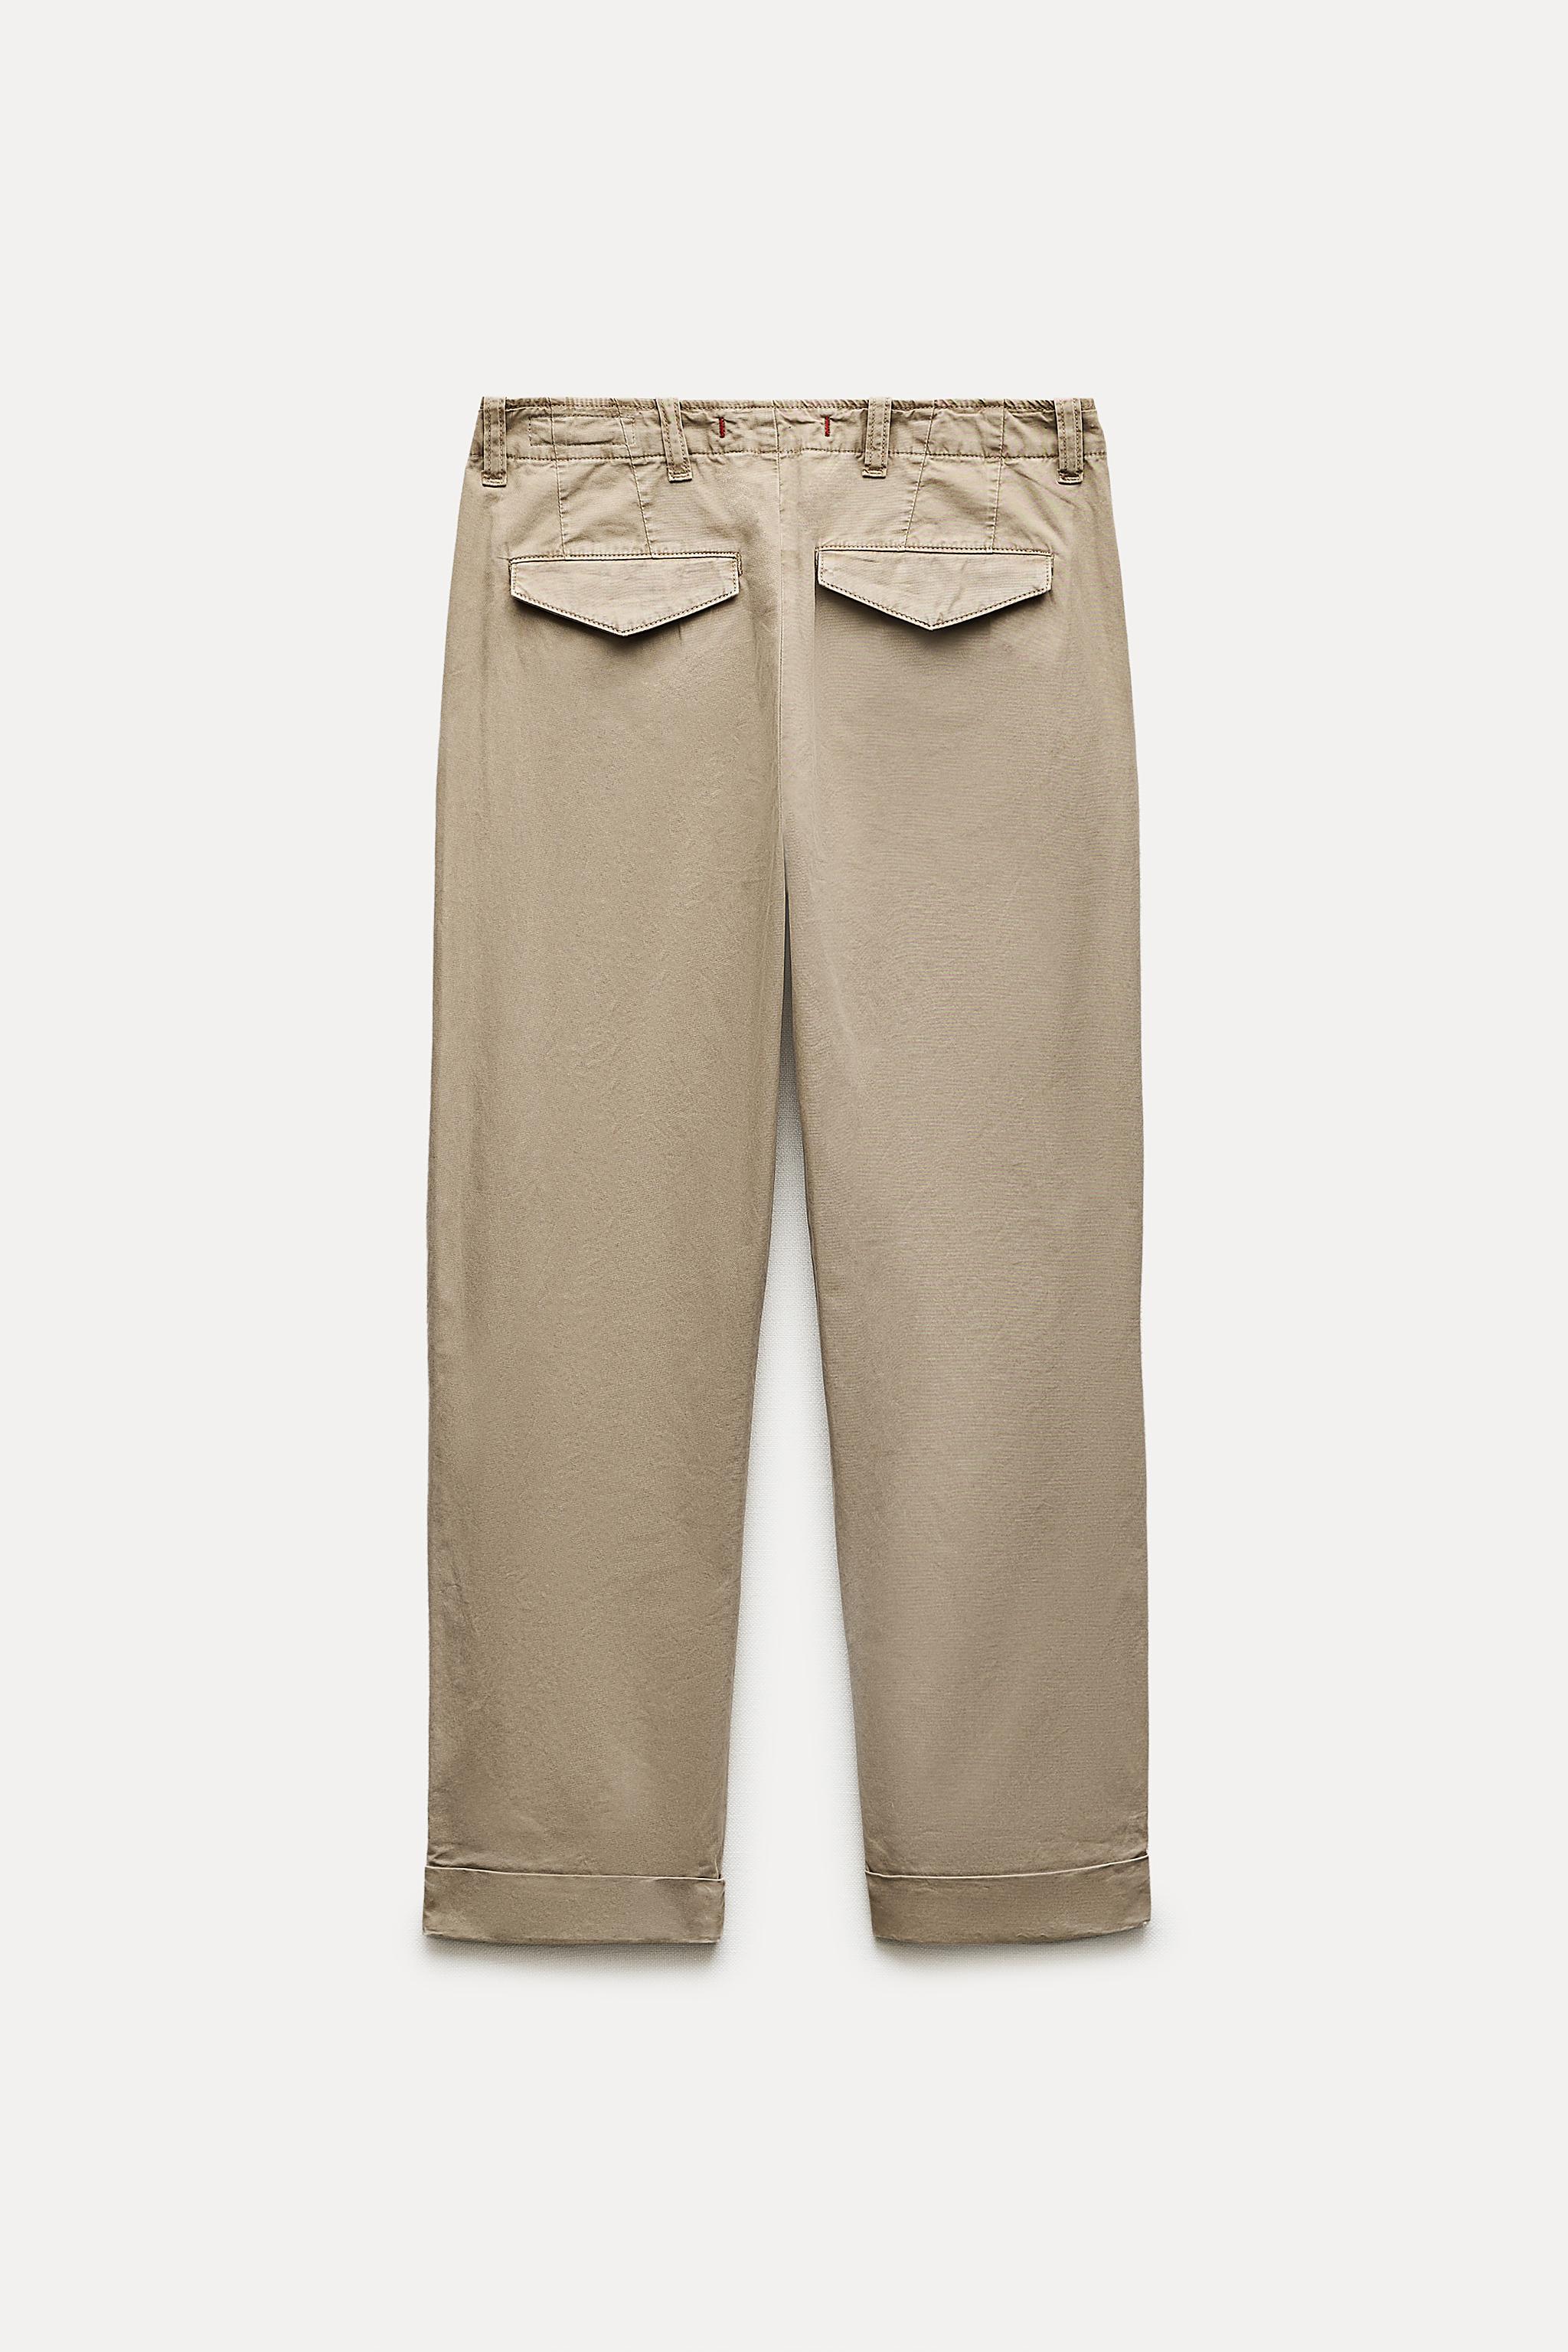 ZW COLLECTION LOW-RISE CHINOS - Brown / Taupe | ZARA India